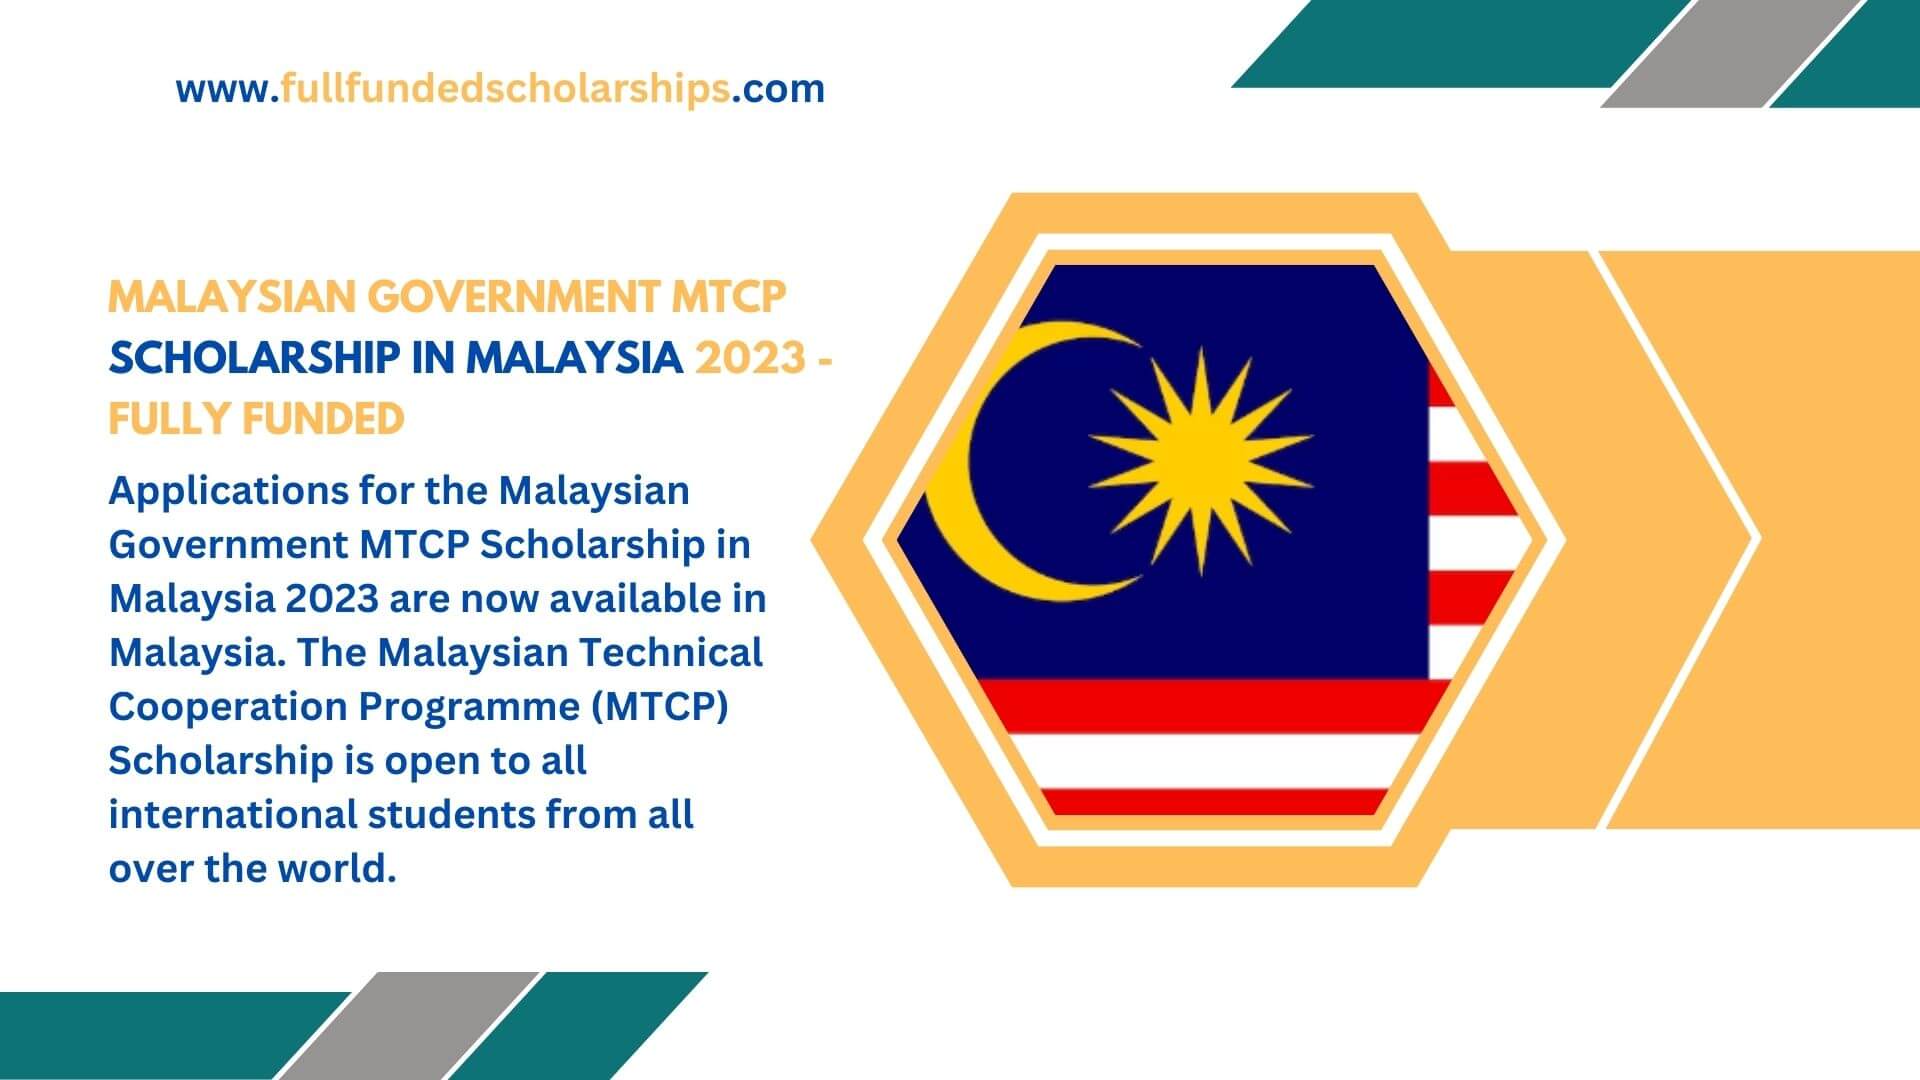 Malaysian Government MTCP Scholarship in Malaysia 2023 - Fully Funded